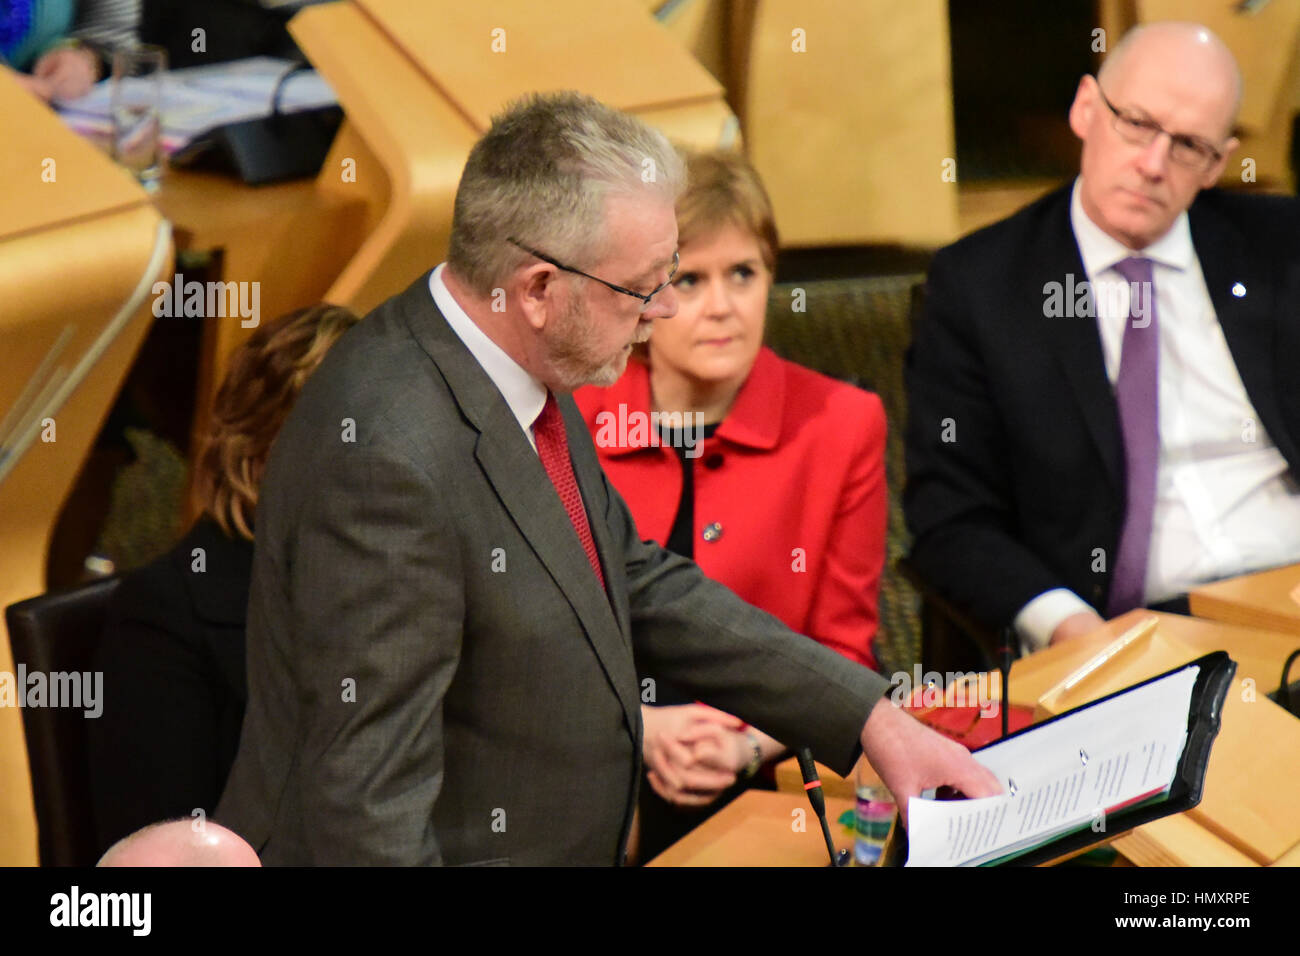 Edinburgh, UK. 7th Feb, 2017. Scottish Brexit Minister Michael Russell (L)introduces a Scottish Government debate in the Scottish Parliament opposing the triggering of Article 50, as First Minister Nicola Sturgeon looks on, Credit: Ken Jack/Alamy Live News Stock Photo